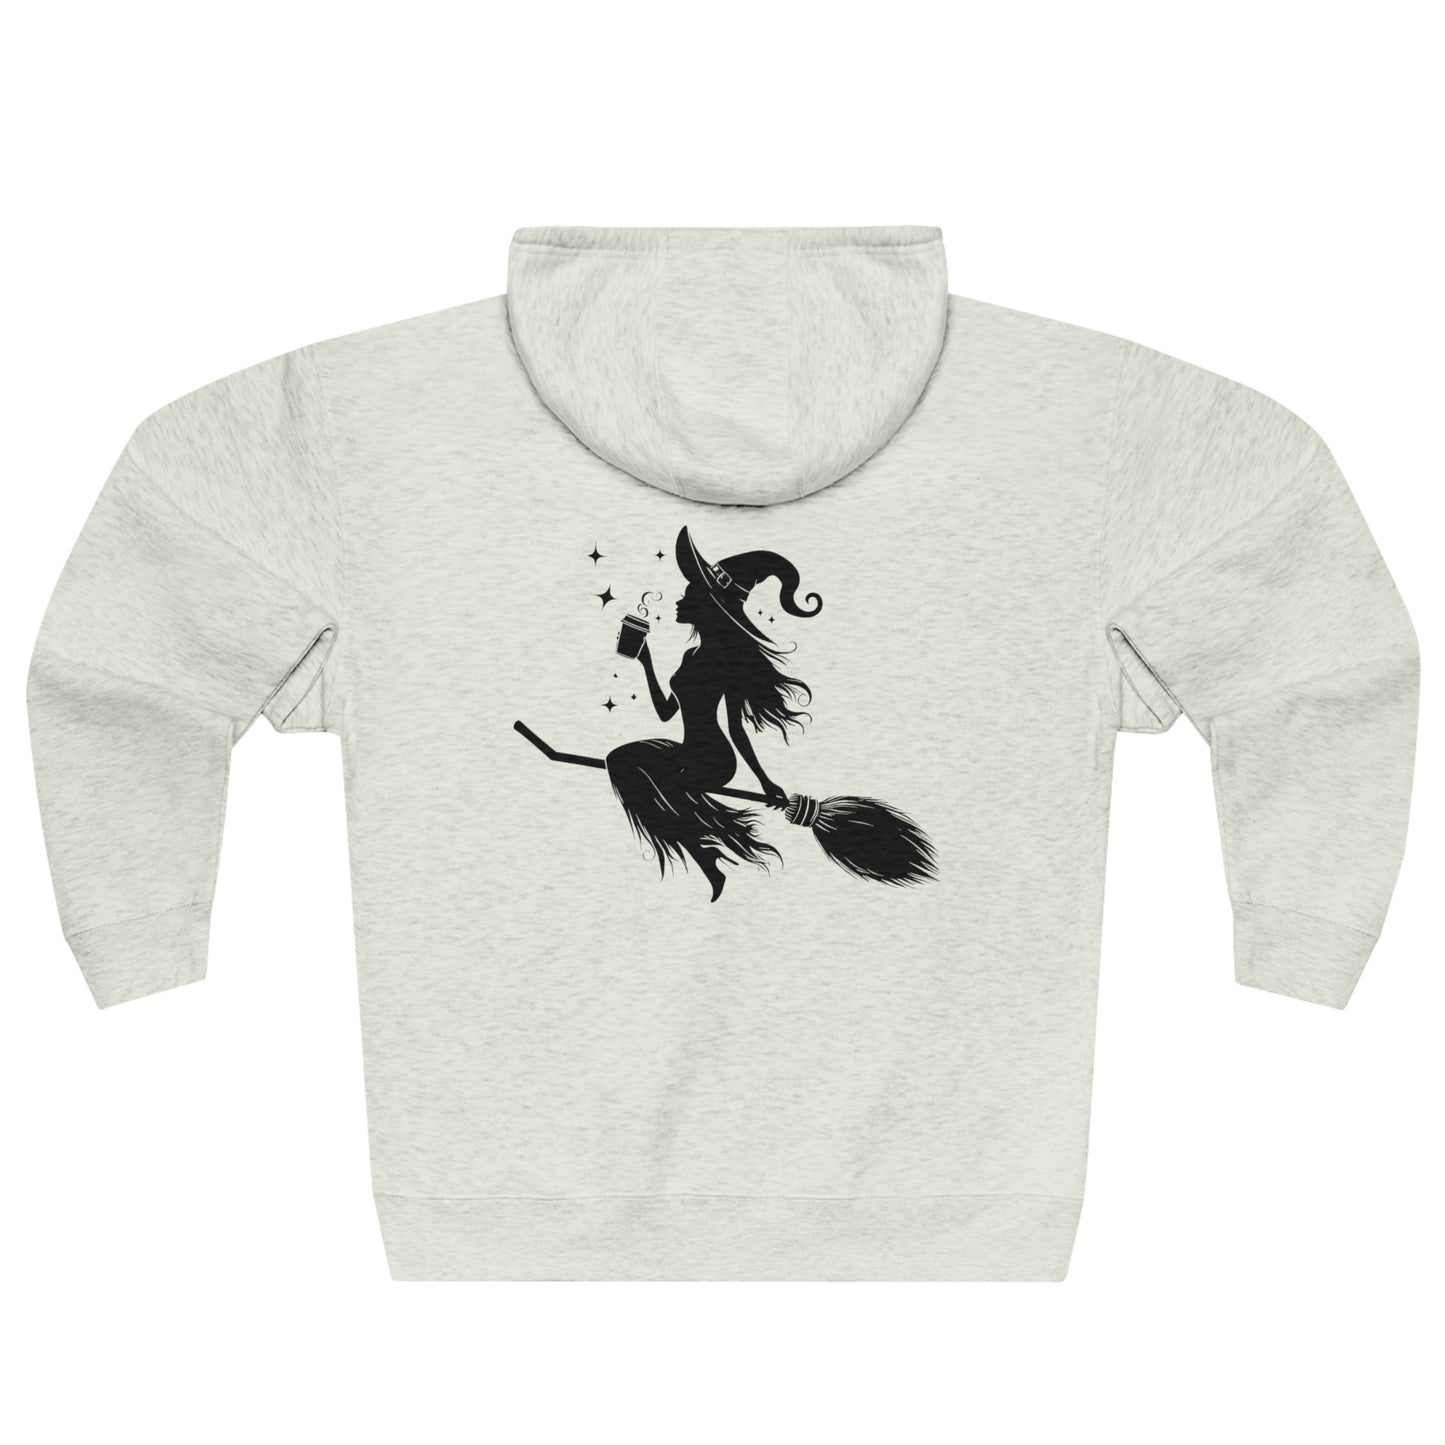 Hoodie: featuring a witch flying with a coffee cup, with a moon in the background. Oatmeal color Hoodie with Black graphics on the front chest,  and back.